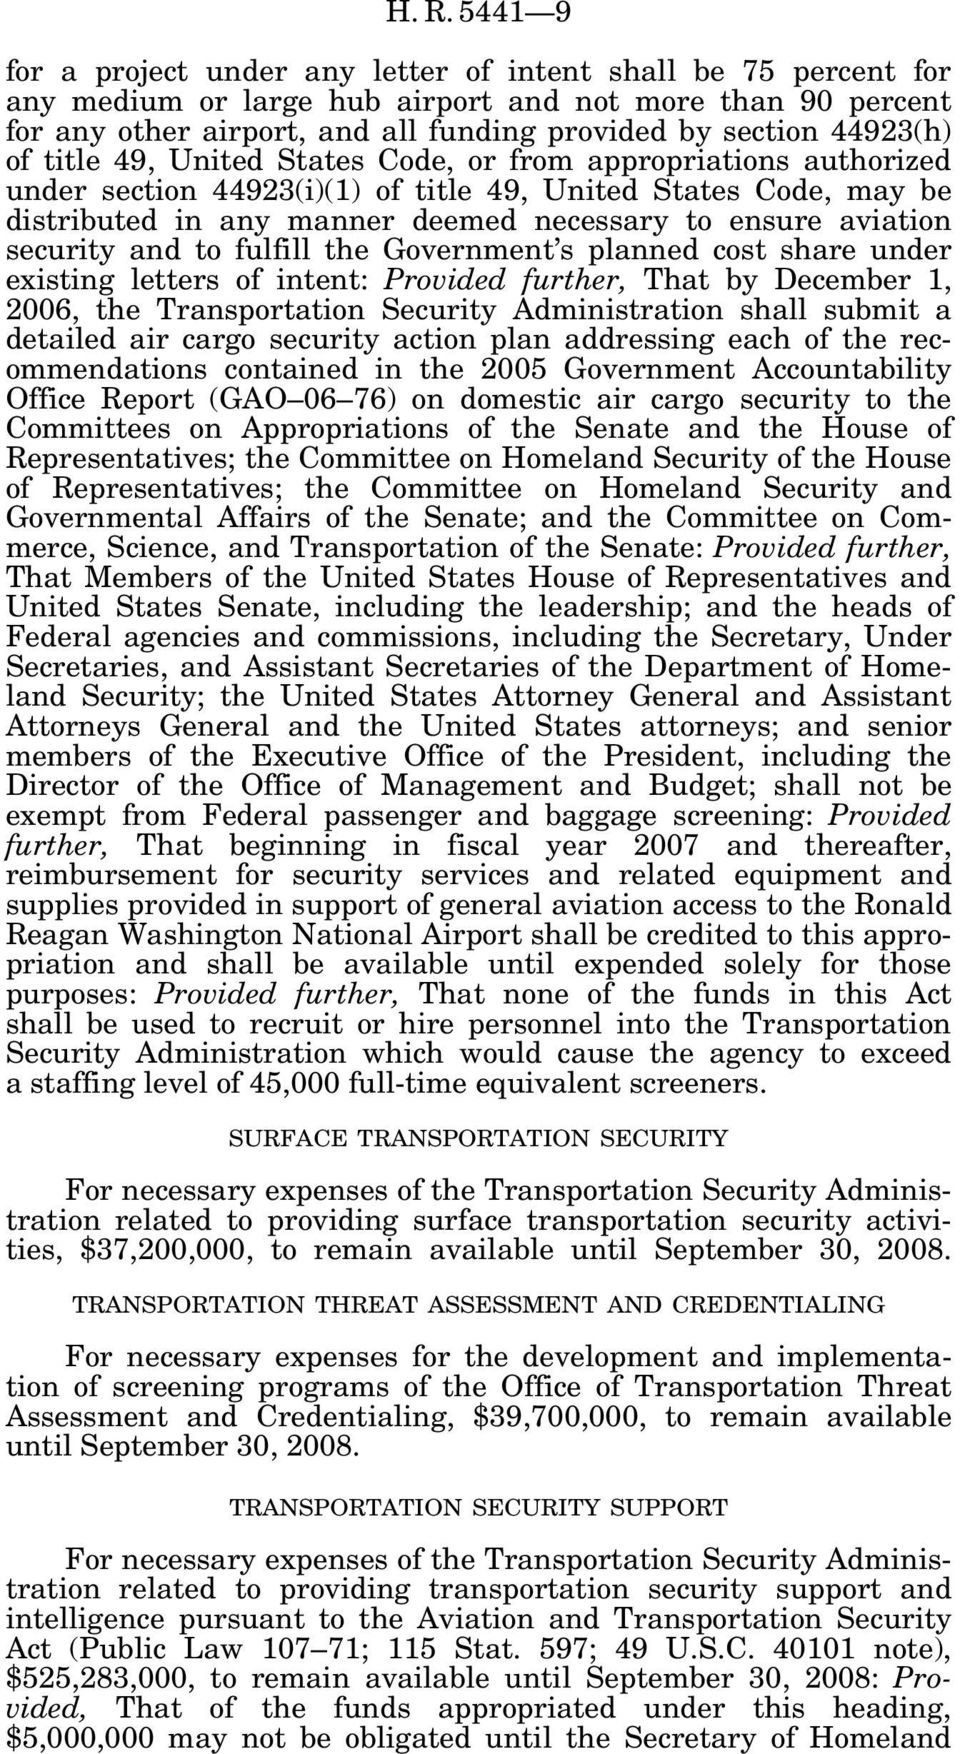 aviation security and to fulfill the Government s planned cost share under existing letters of intent: Provided further, That by December 1, 2006, the Transportation Security Administration shall